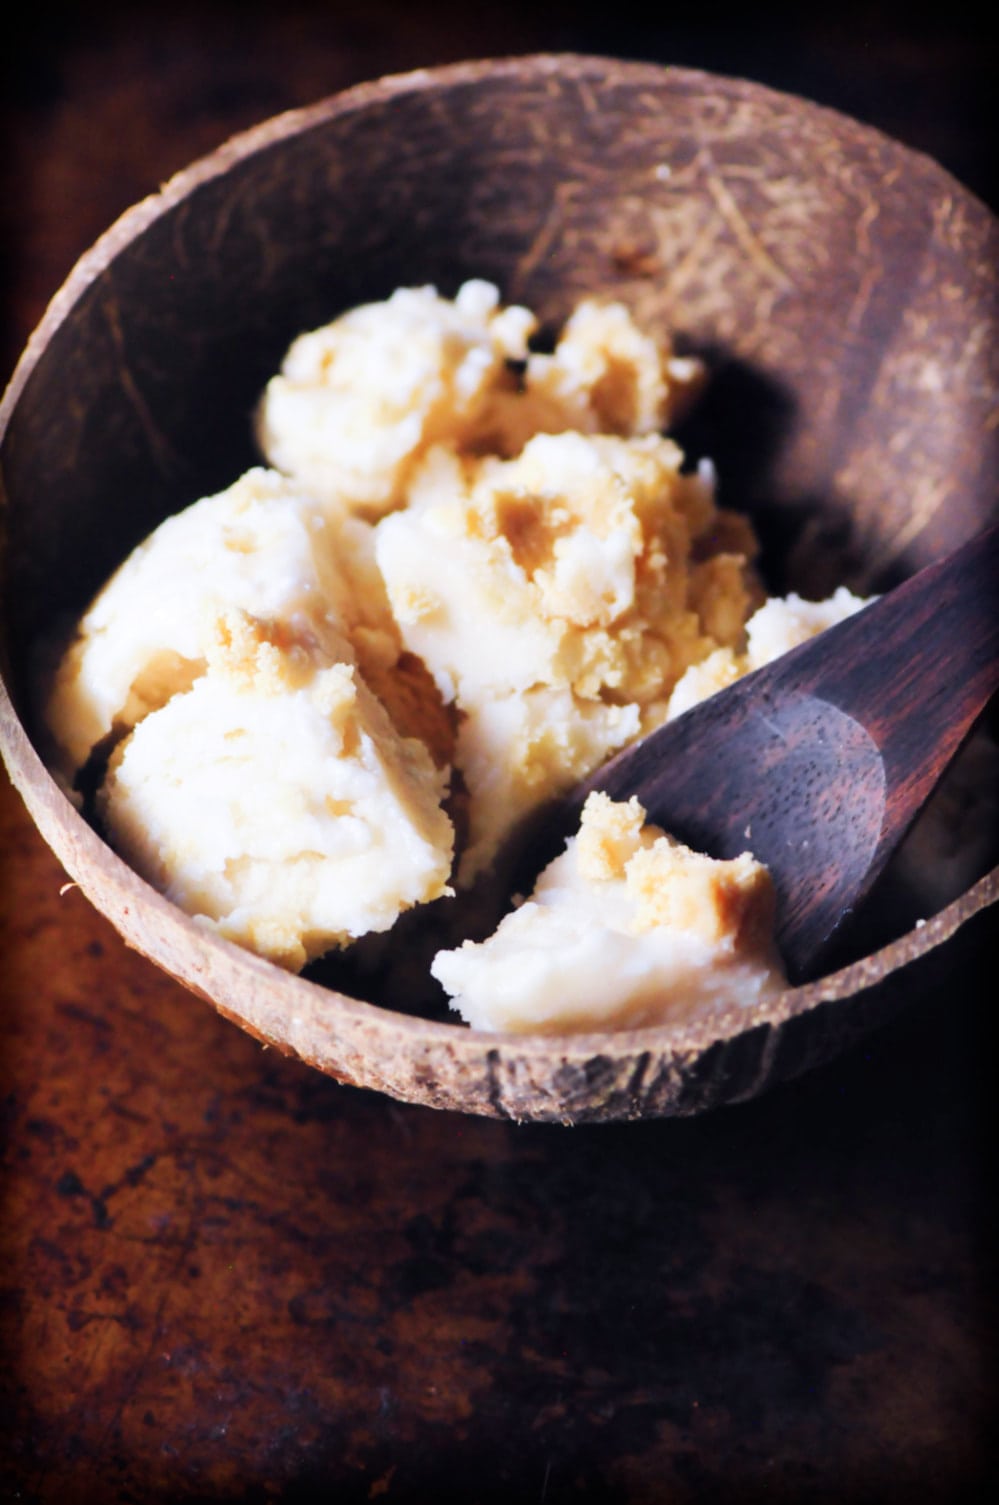  An easy, creamy and delicious Double Coconut Caramel Cookie Dough Ice Cream. A delightful vegan coconut ice cream base made with sweetened condensed coconut milk is studded with tasty and chewy gluten-free coconut caramel cookie dough bites in this frozen treat perfect for summer or any time of the year! #vegancookiedoughicecream #glutenfreecookiedoughicecream #coconutcookiedough #caramelcookiedough #coconuticecream #veganicecream #glutenfreecookiedough 